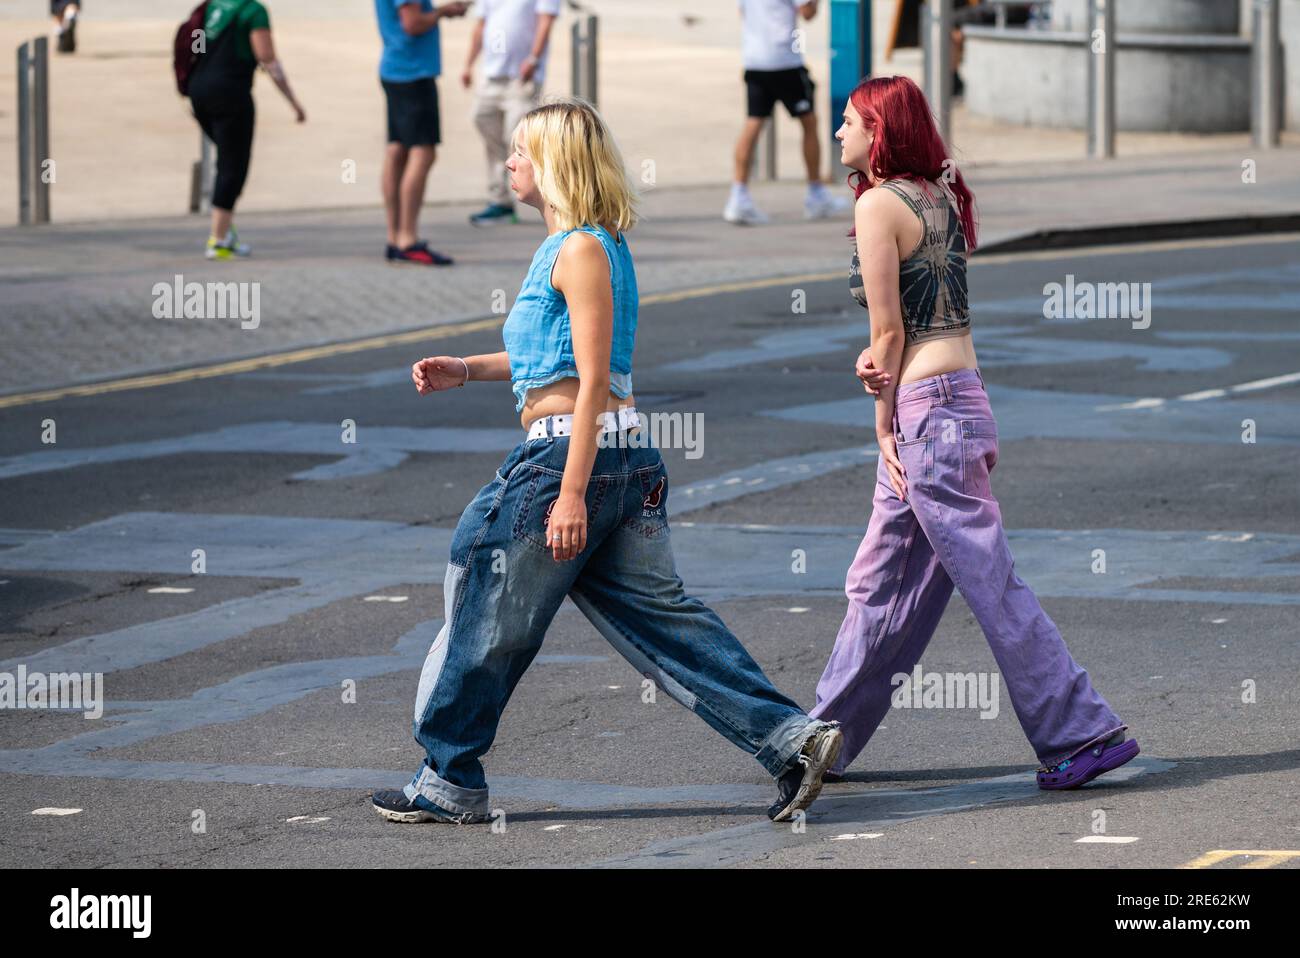 Pair of young slim women, girls or teenagers, dressed in jeans, walking across a road and going shopping in Summer, UK. Friends at shops. Stock Photo